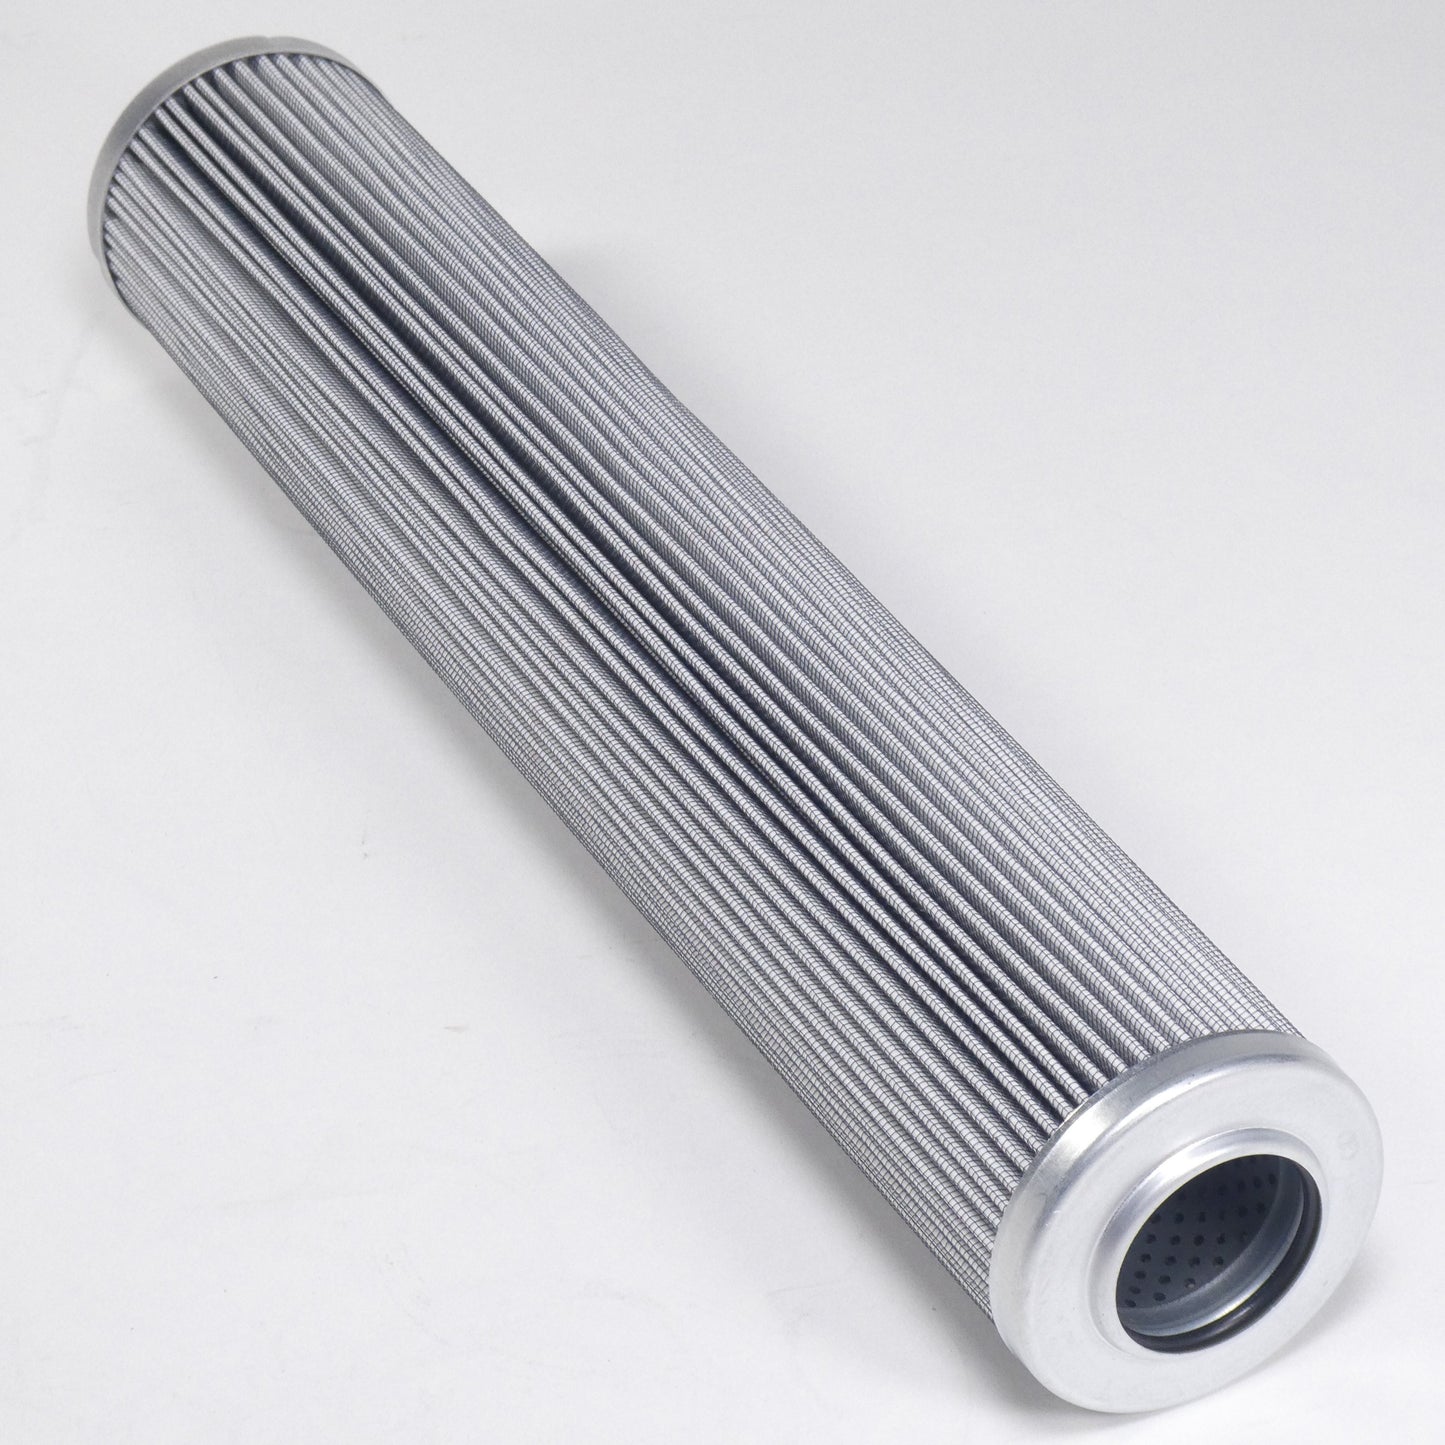 Hydrafil Replacement Filter Element for Filtersoft H9616MDB